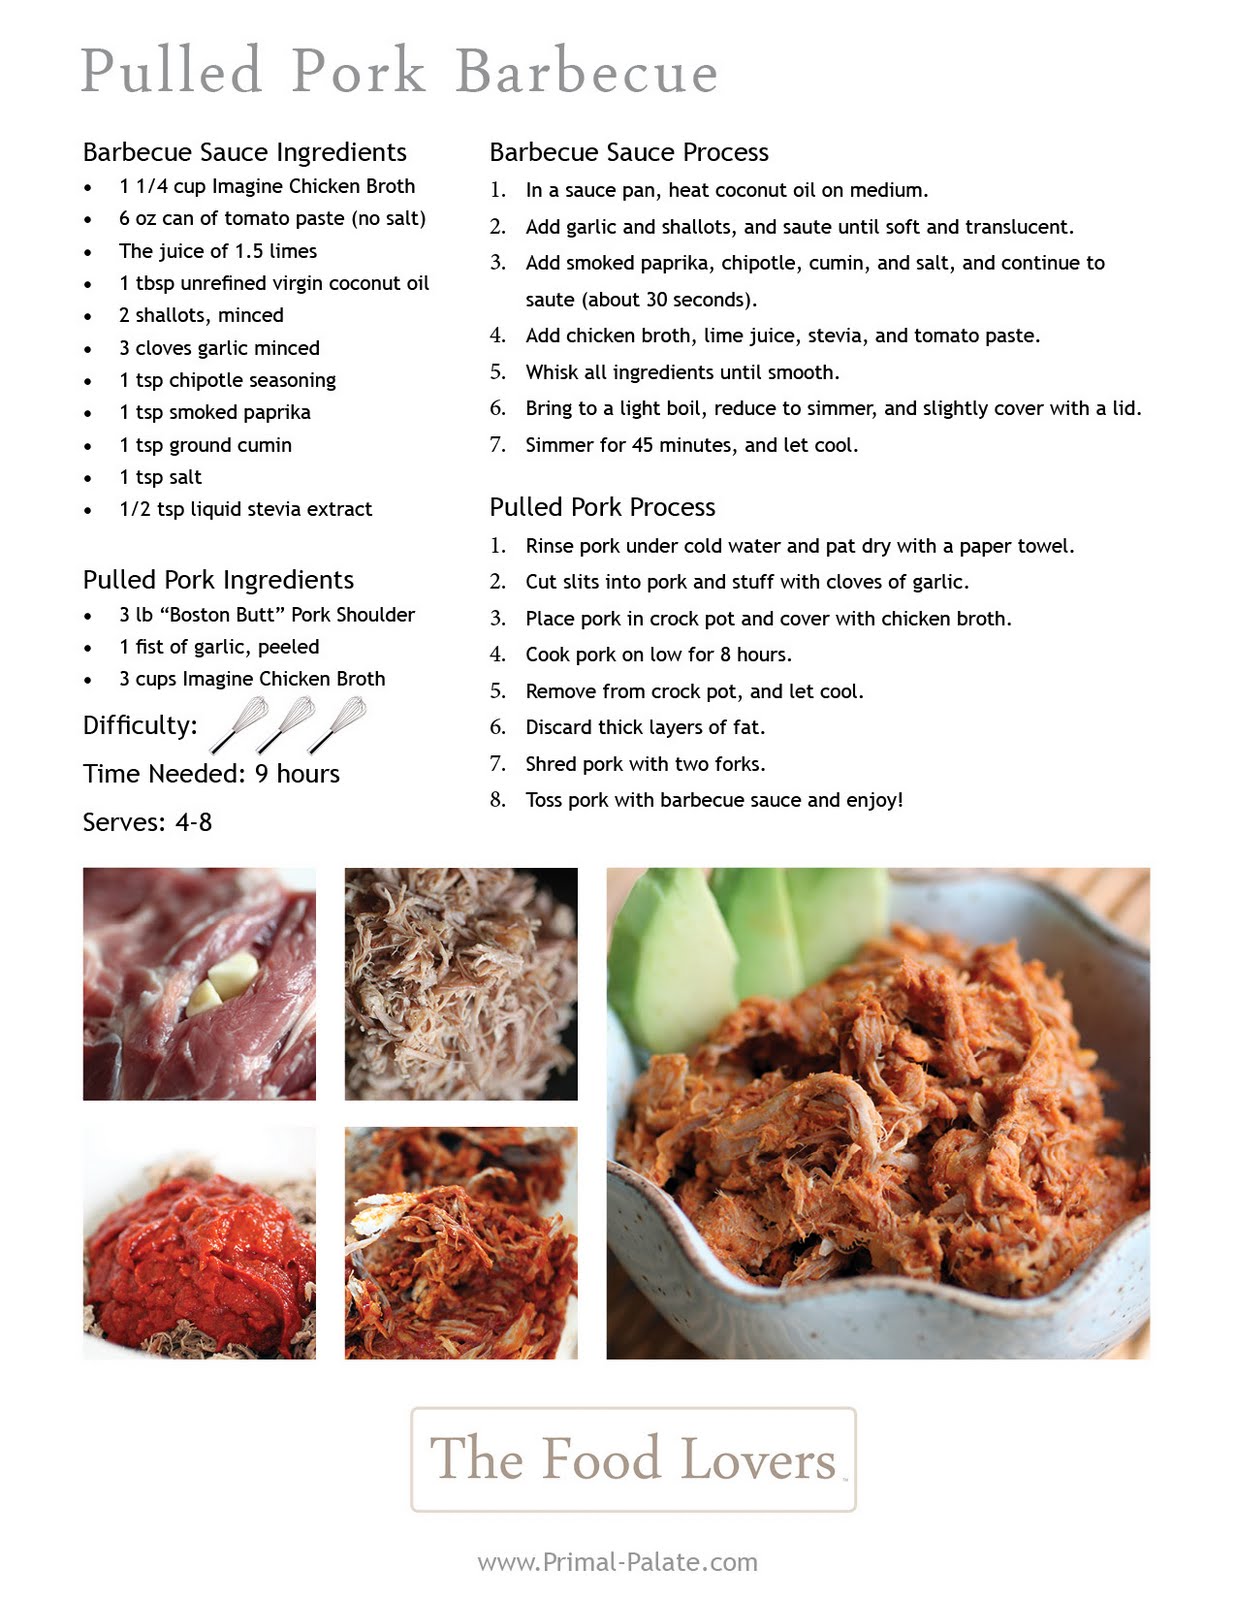 Pulled Pork Barbecue | Primal Palate | Paleo Recipes